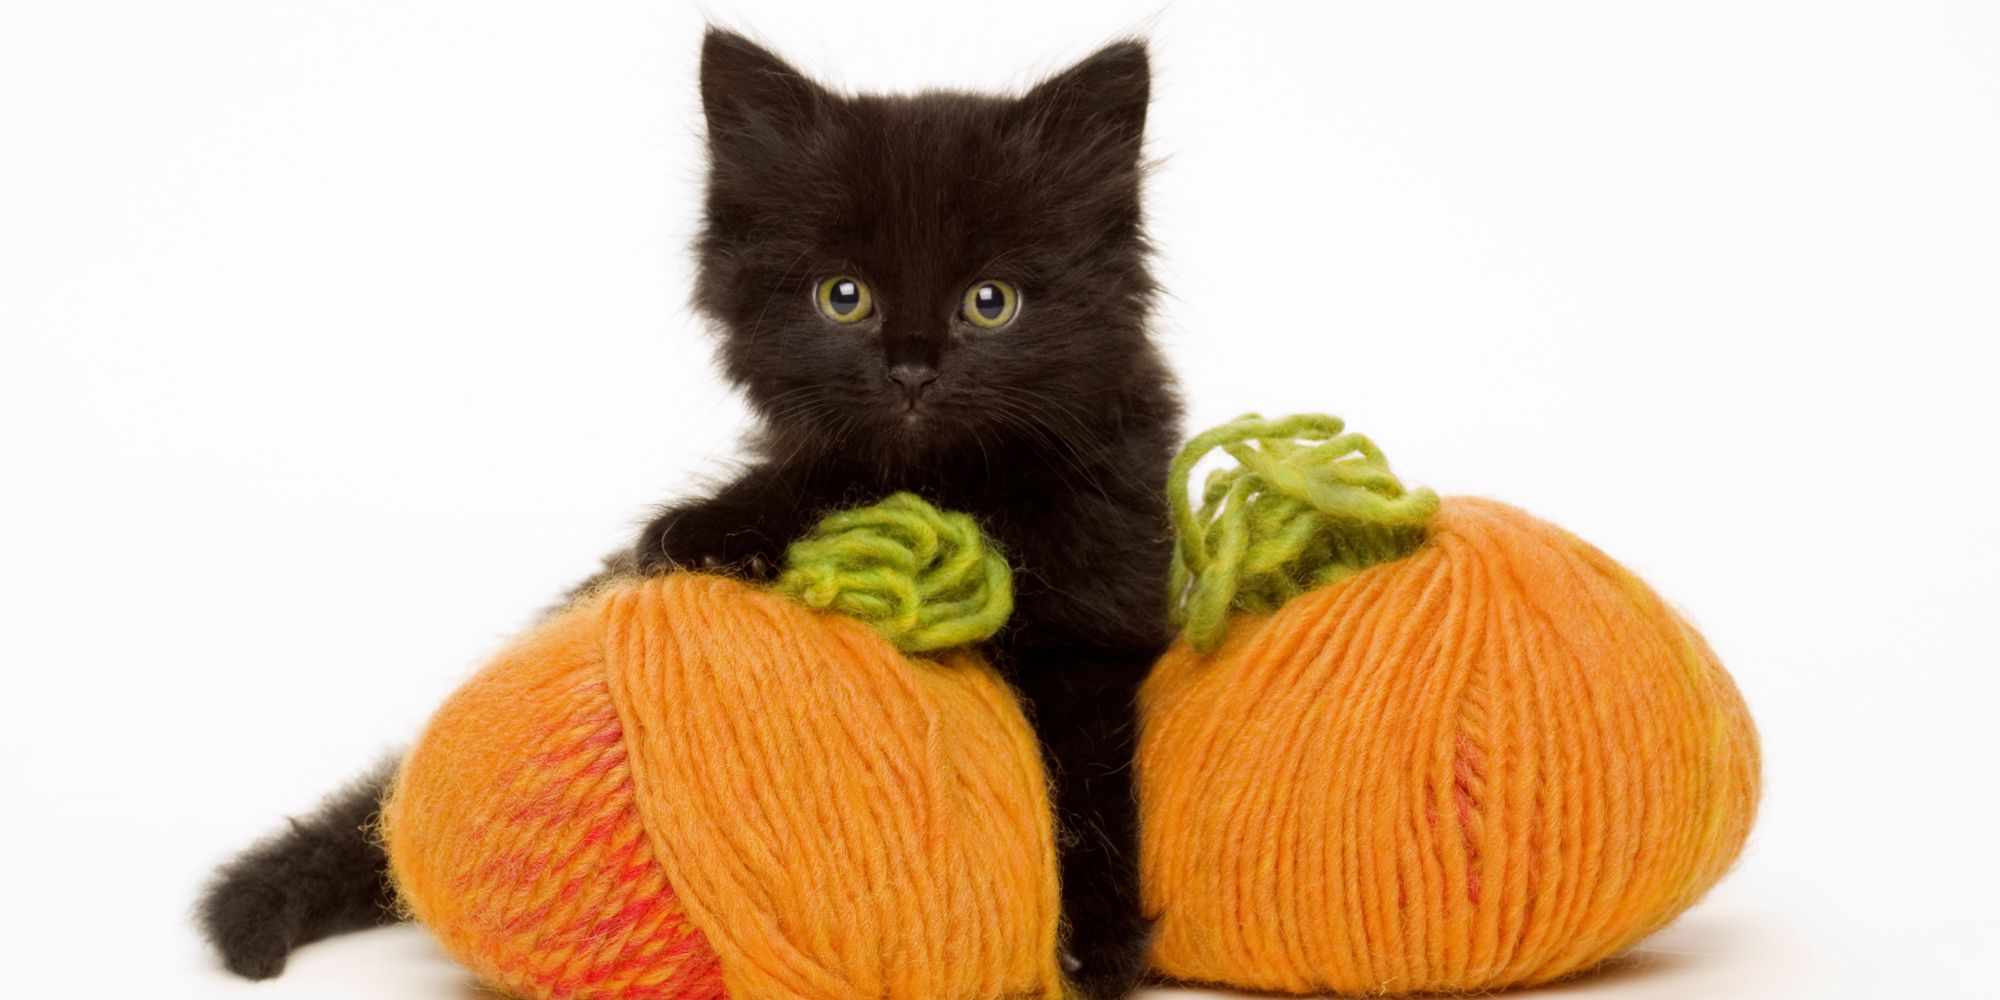 12 Cute Black Cat Names - Good Names for Male and Female Black Cats